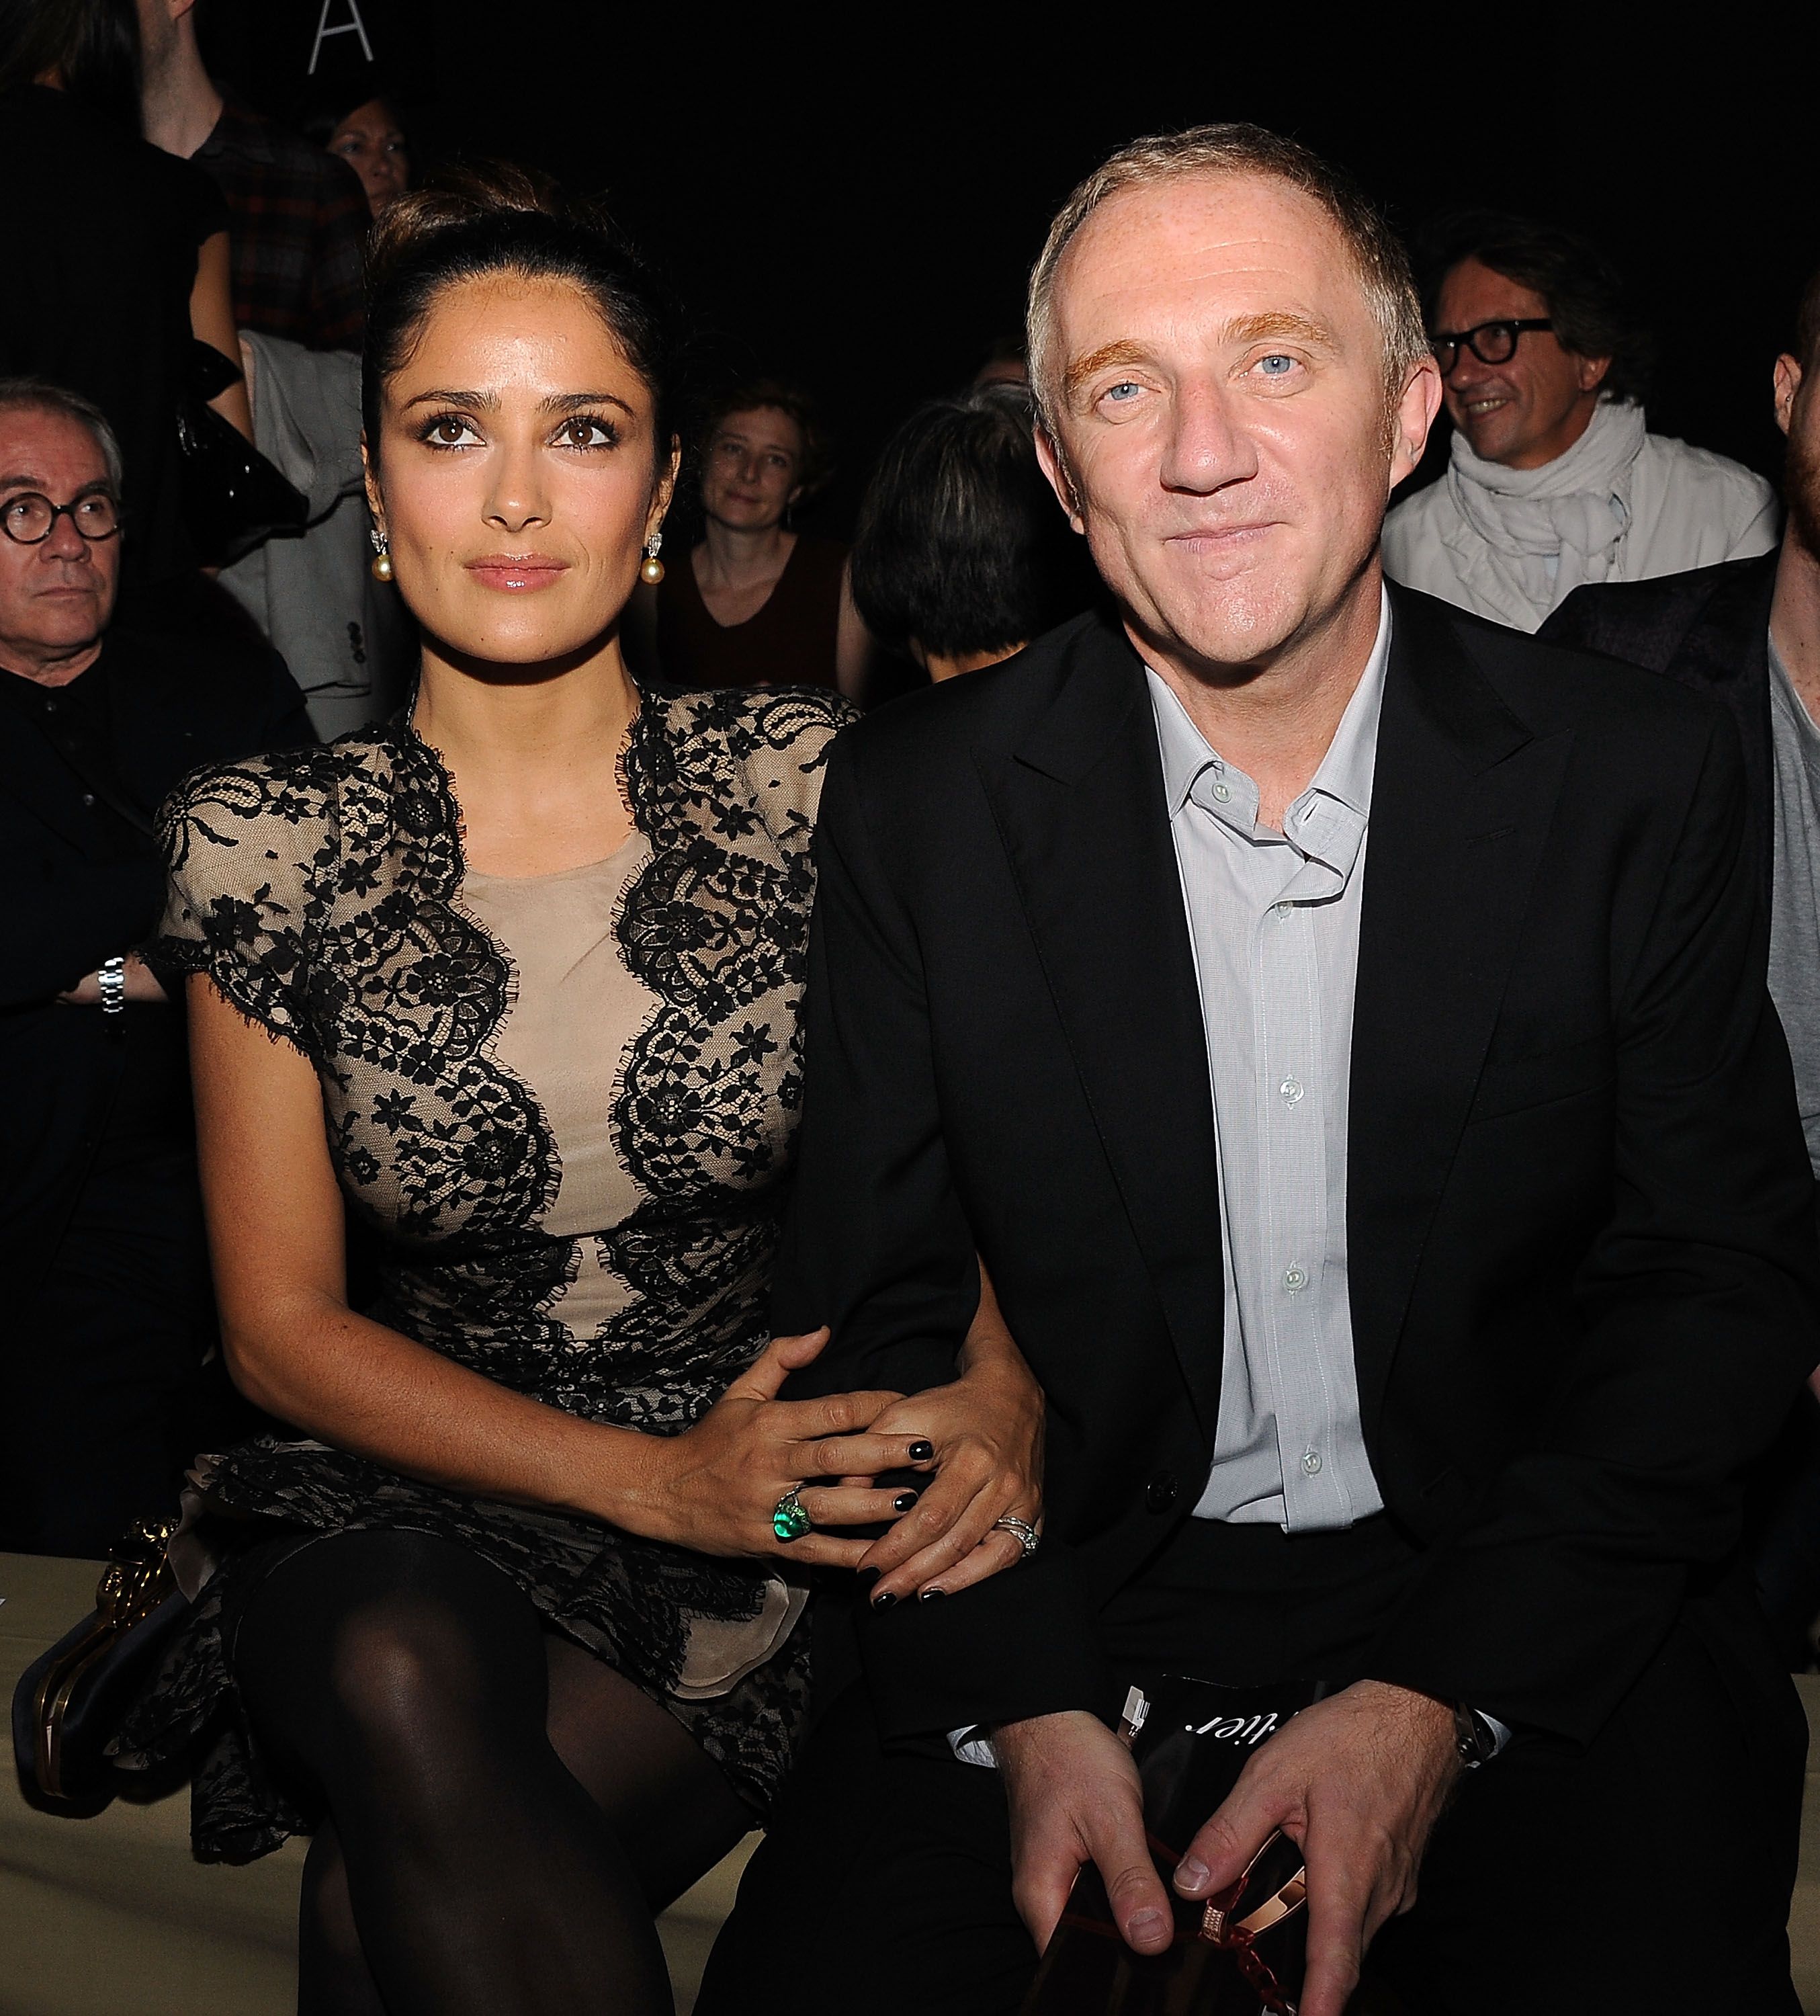 Salma Hayek and Francois-Henri Pinault at the Alexander McQueen Ready to Wear Spring/Summer show during Paris Fashion Week on October 5, 2010, in France | Photo: Pascal Le Segretain/Getty Images